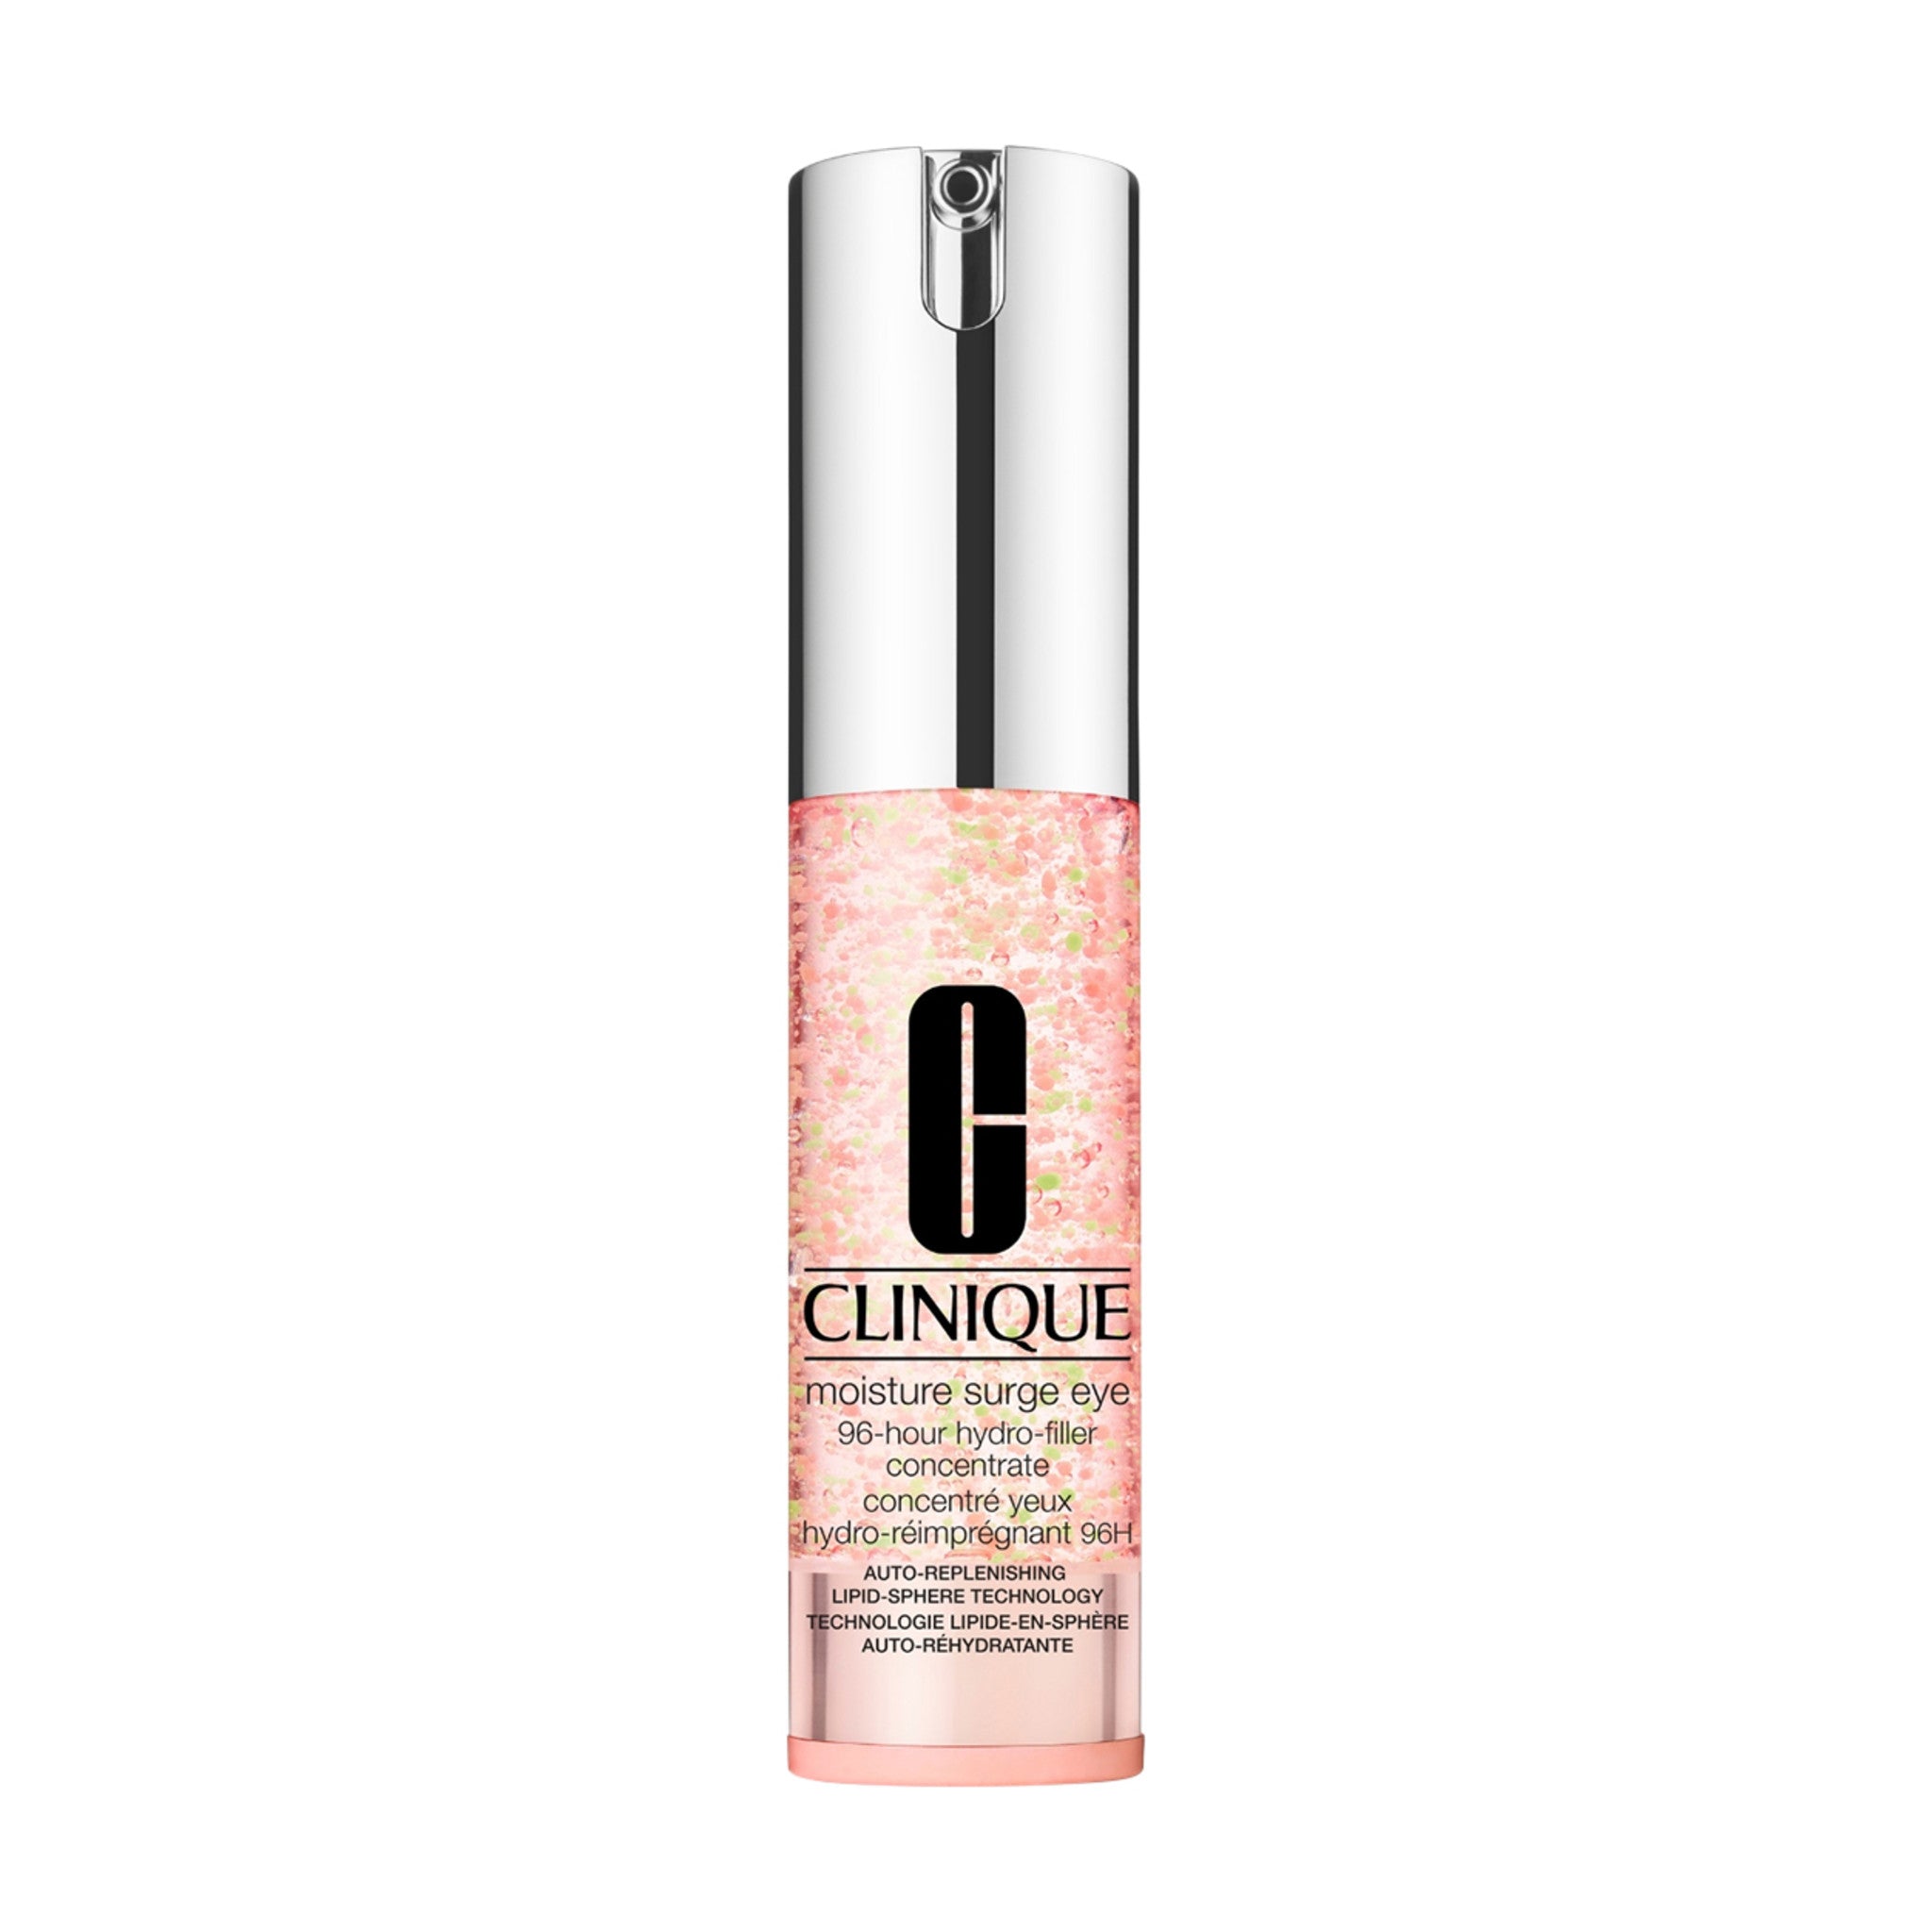 Clinique Moisture Surge Eye 96-Hour Hydro Filler Concentrate main image.